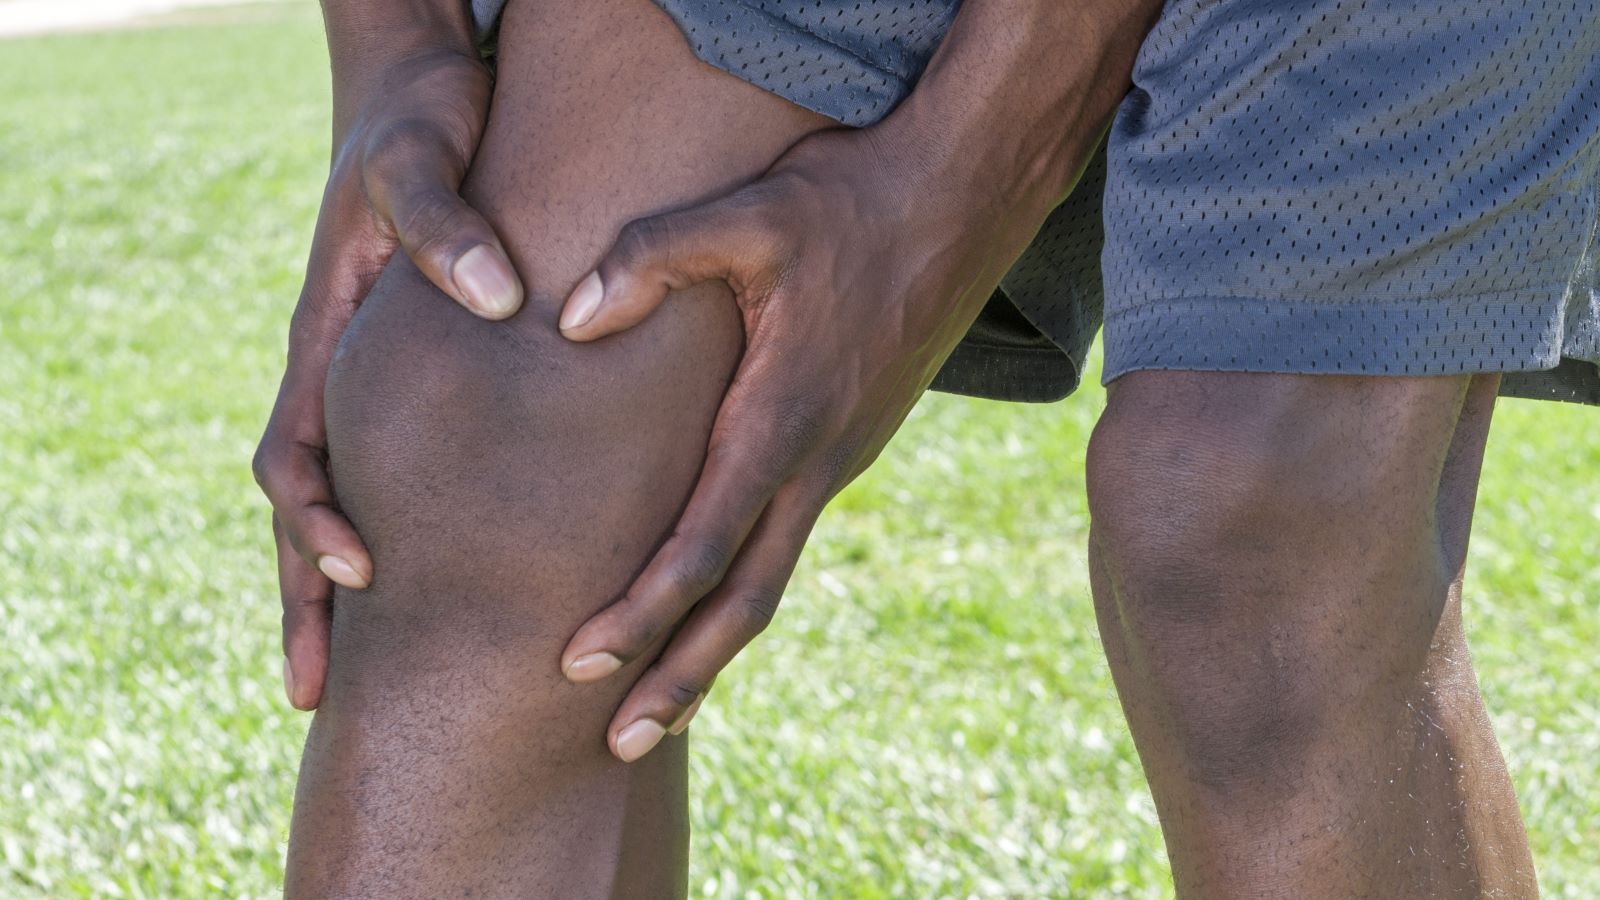 If your knee is swollen, it's usually a sign that something's going on with the joint. But is it time to see a doctor?